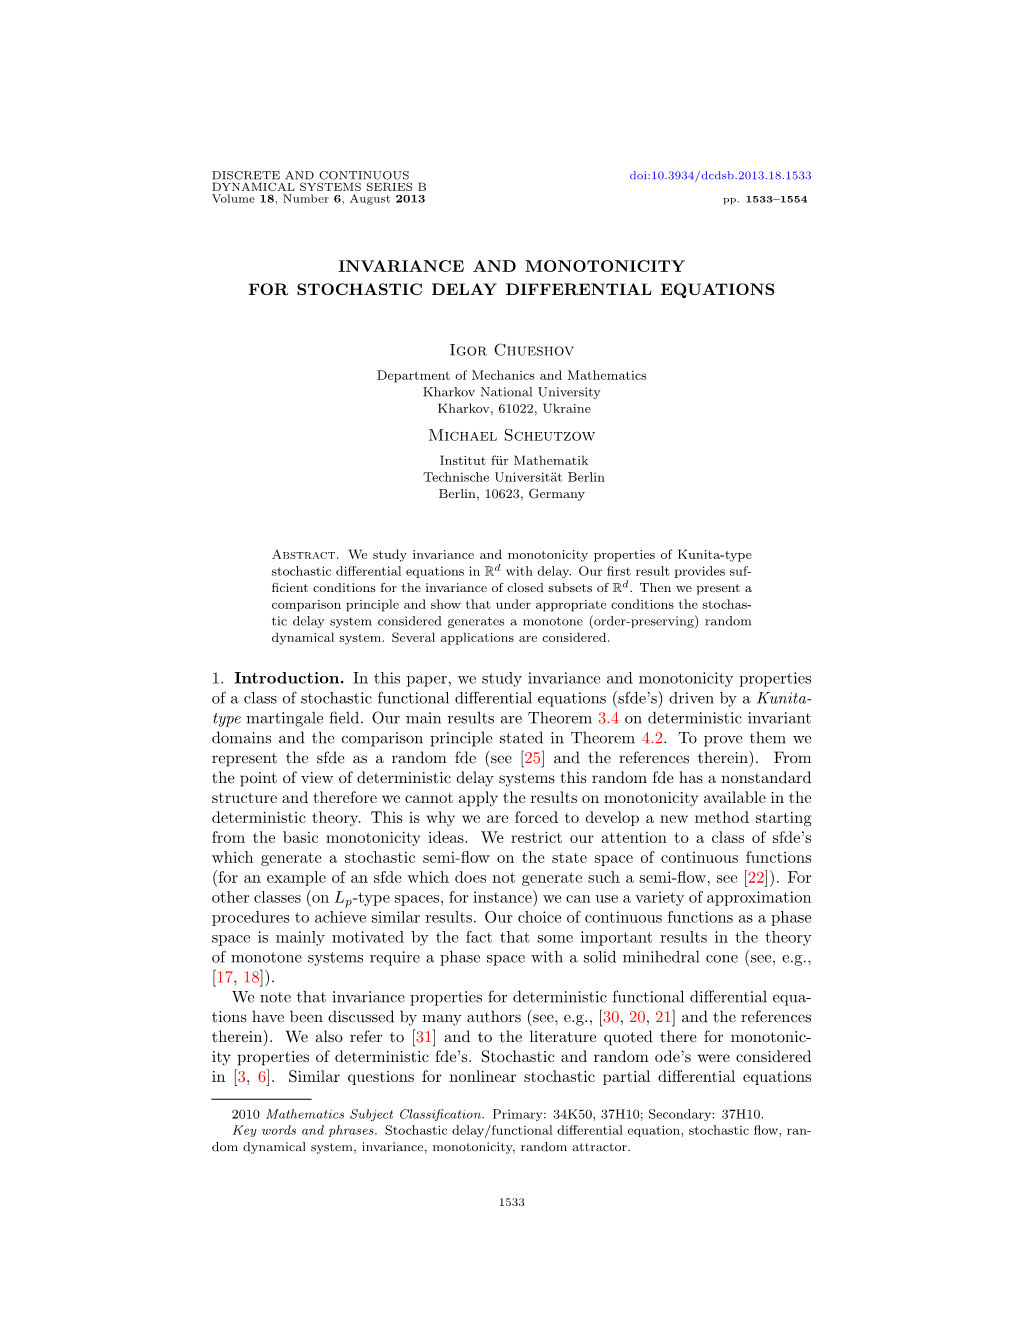 Invariance and Monotonicity for Stochastic Delay Differential Equations